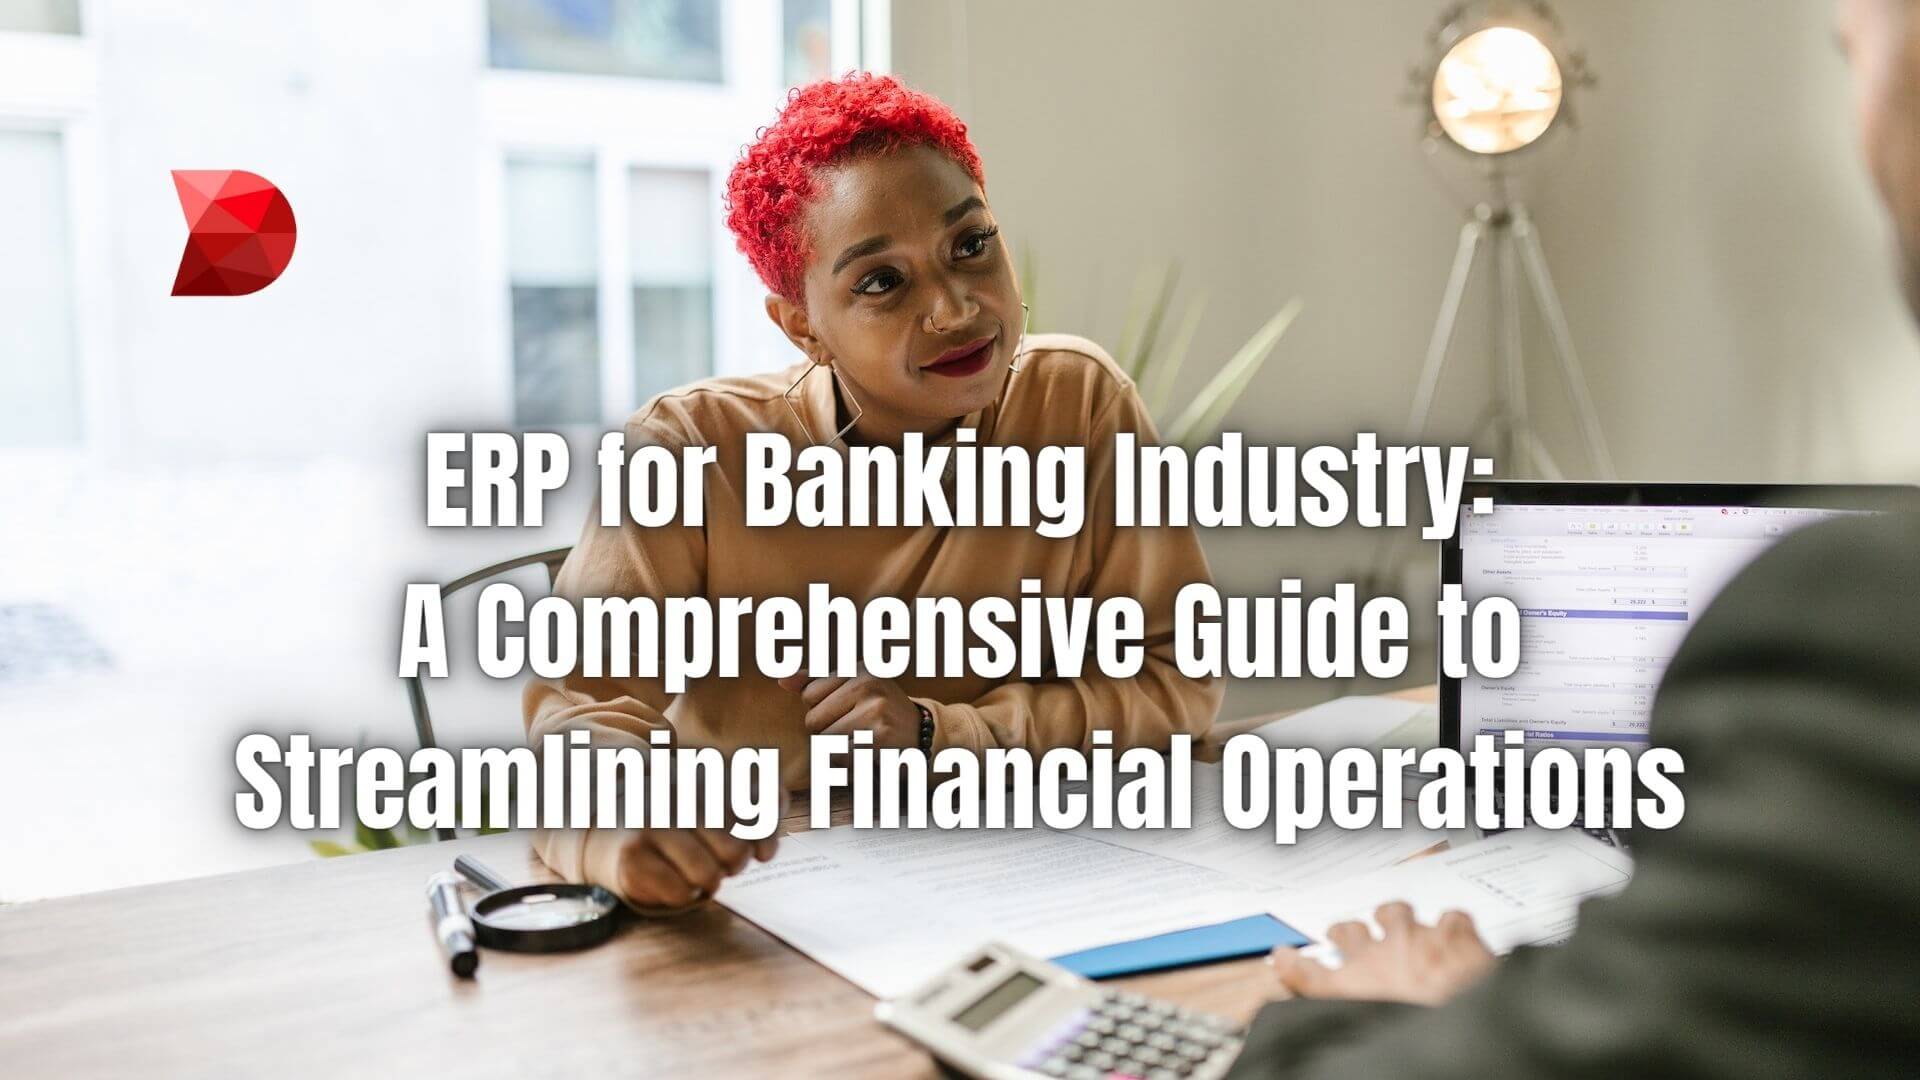 The transformation of the banking sector by Enterprise Resource Planning (ERP) software is truly noteworthy. Click here to learn why!